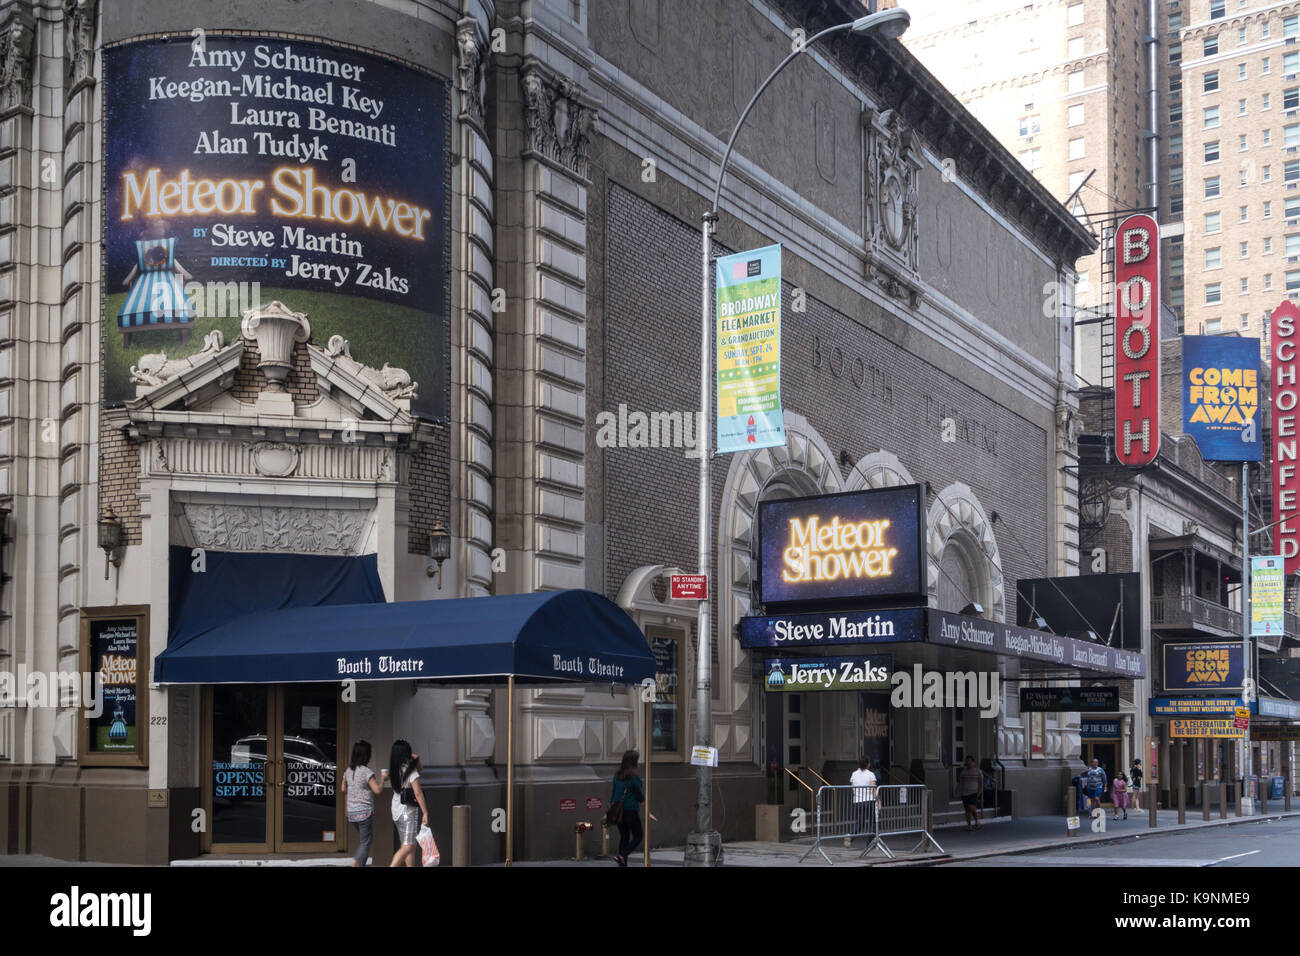 Meteor Shower Marquee at The Booth Theatre, Broadway, Times Square, NYC Stock Photo